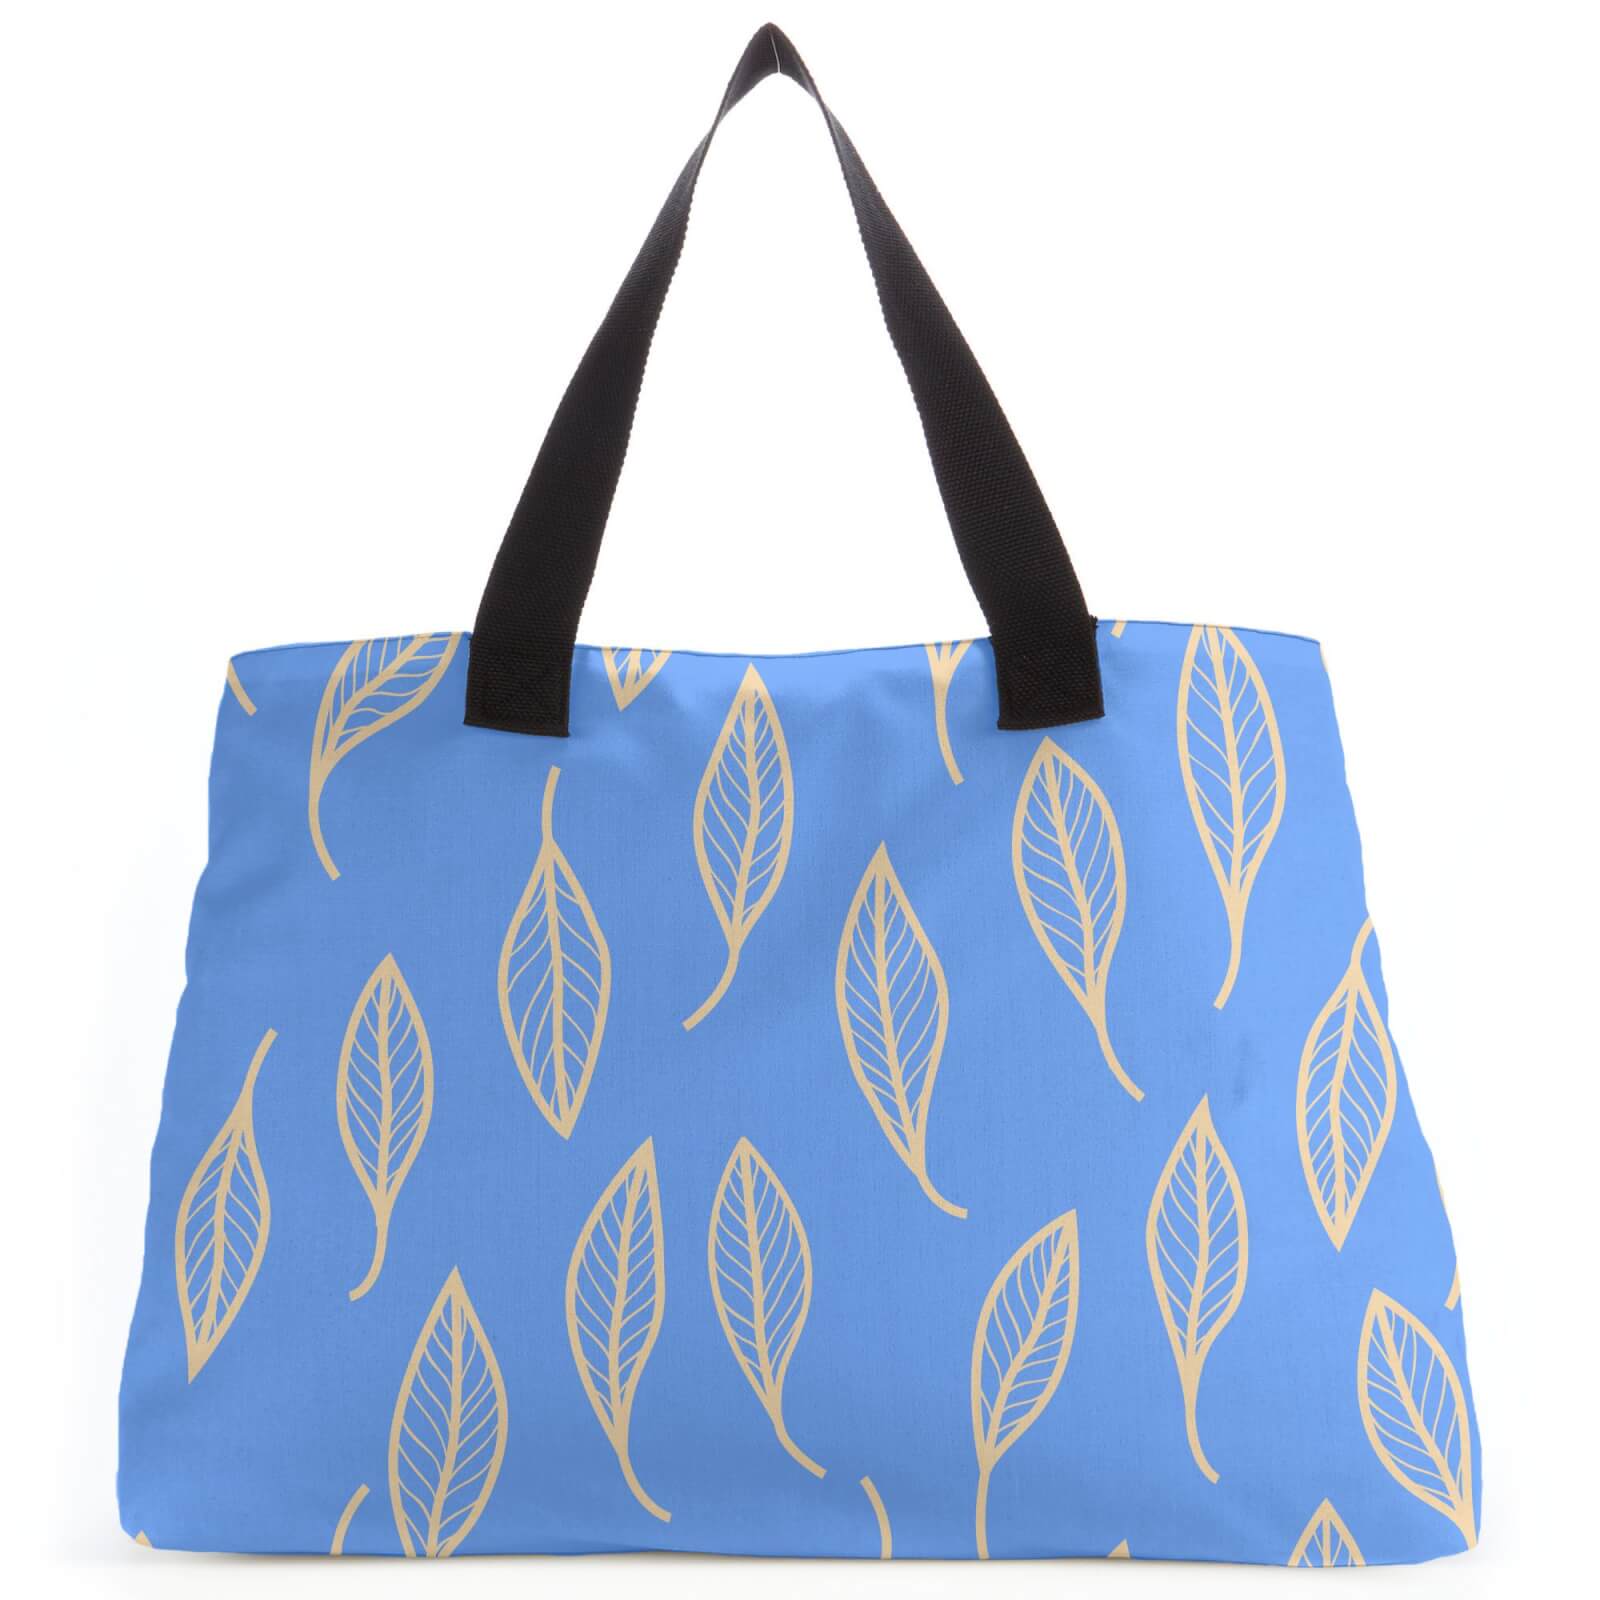 Scattered Leaves Tote Bag